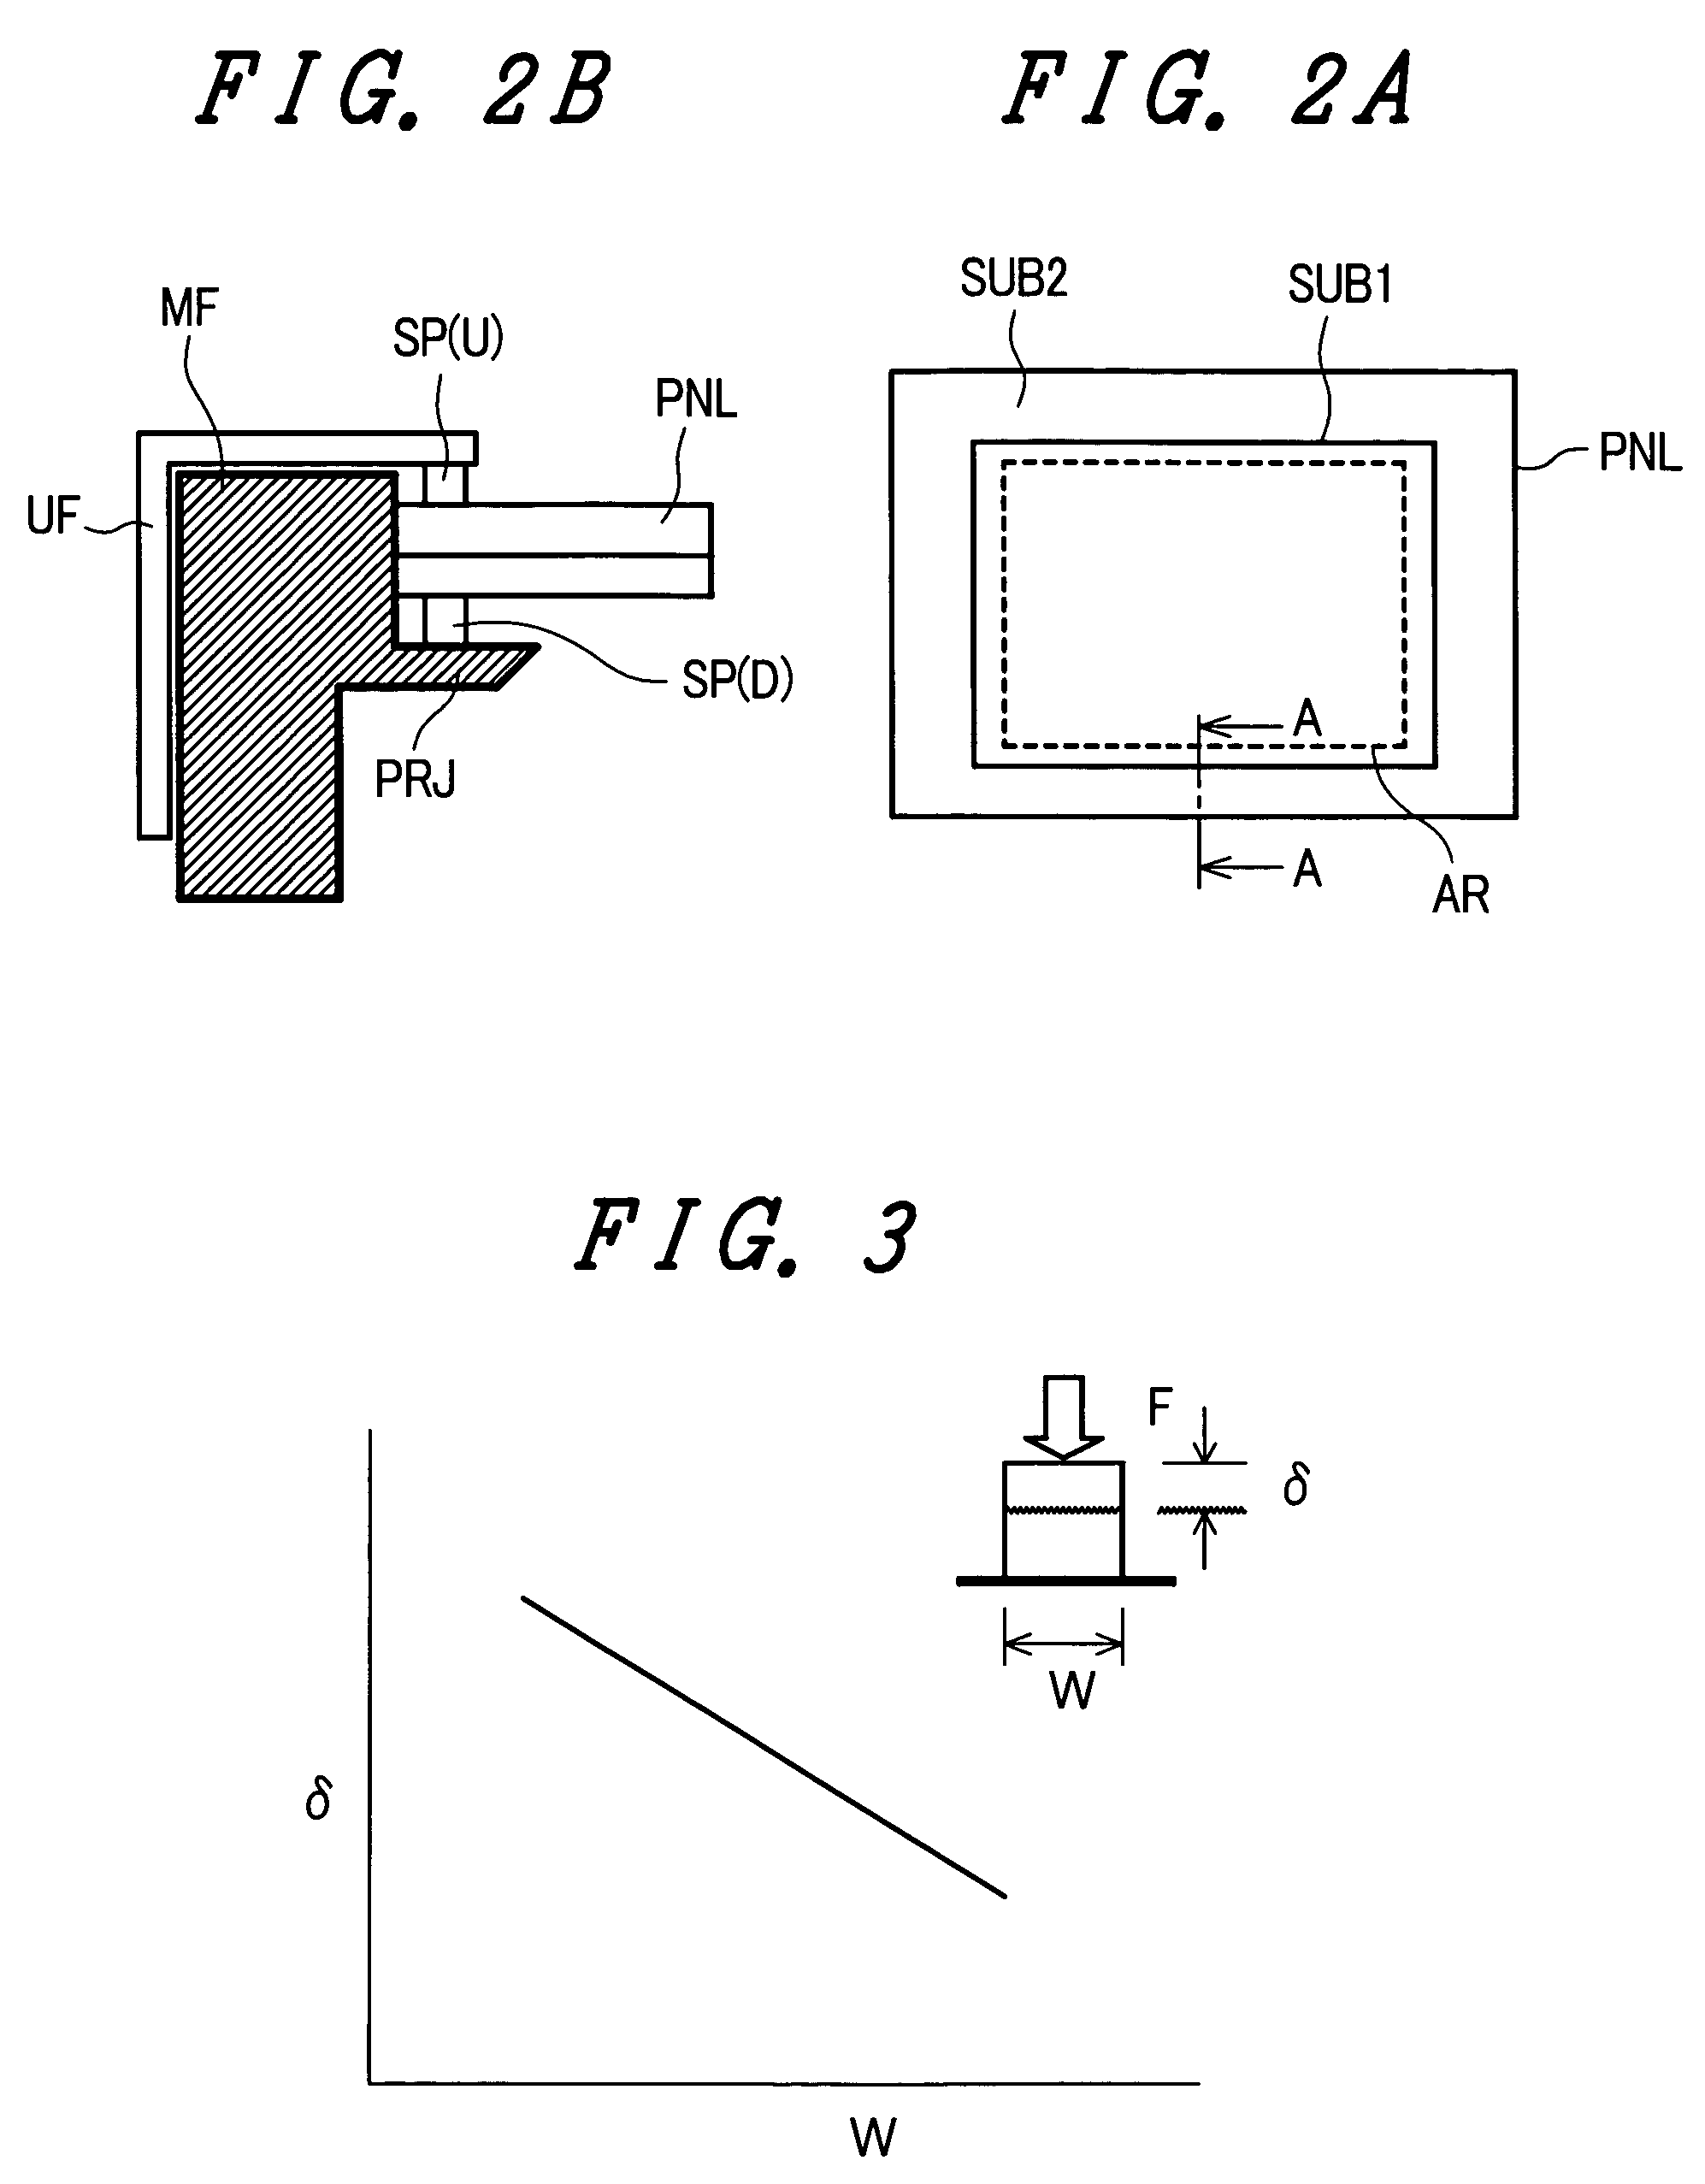 Display device with elastic spacers having varying widths and hardness